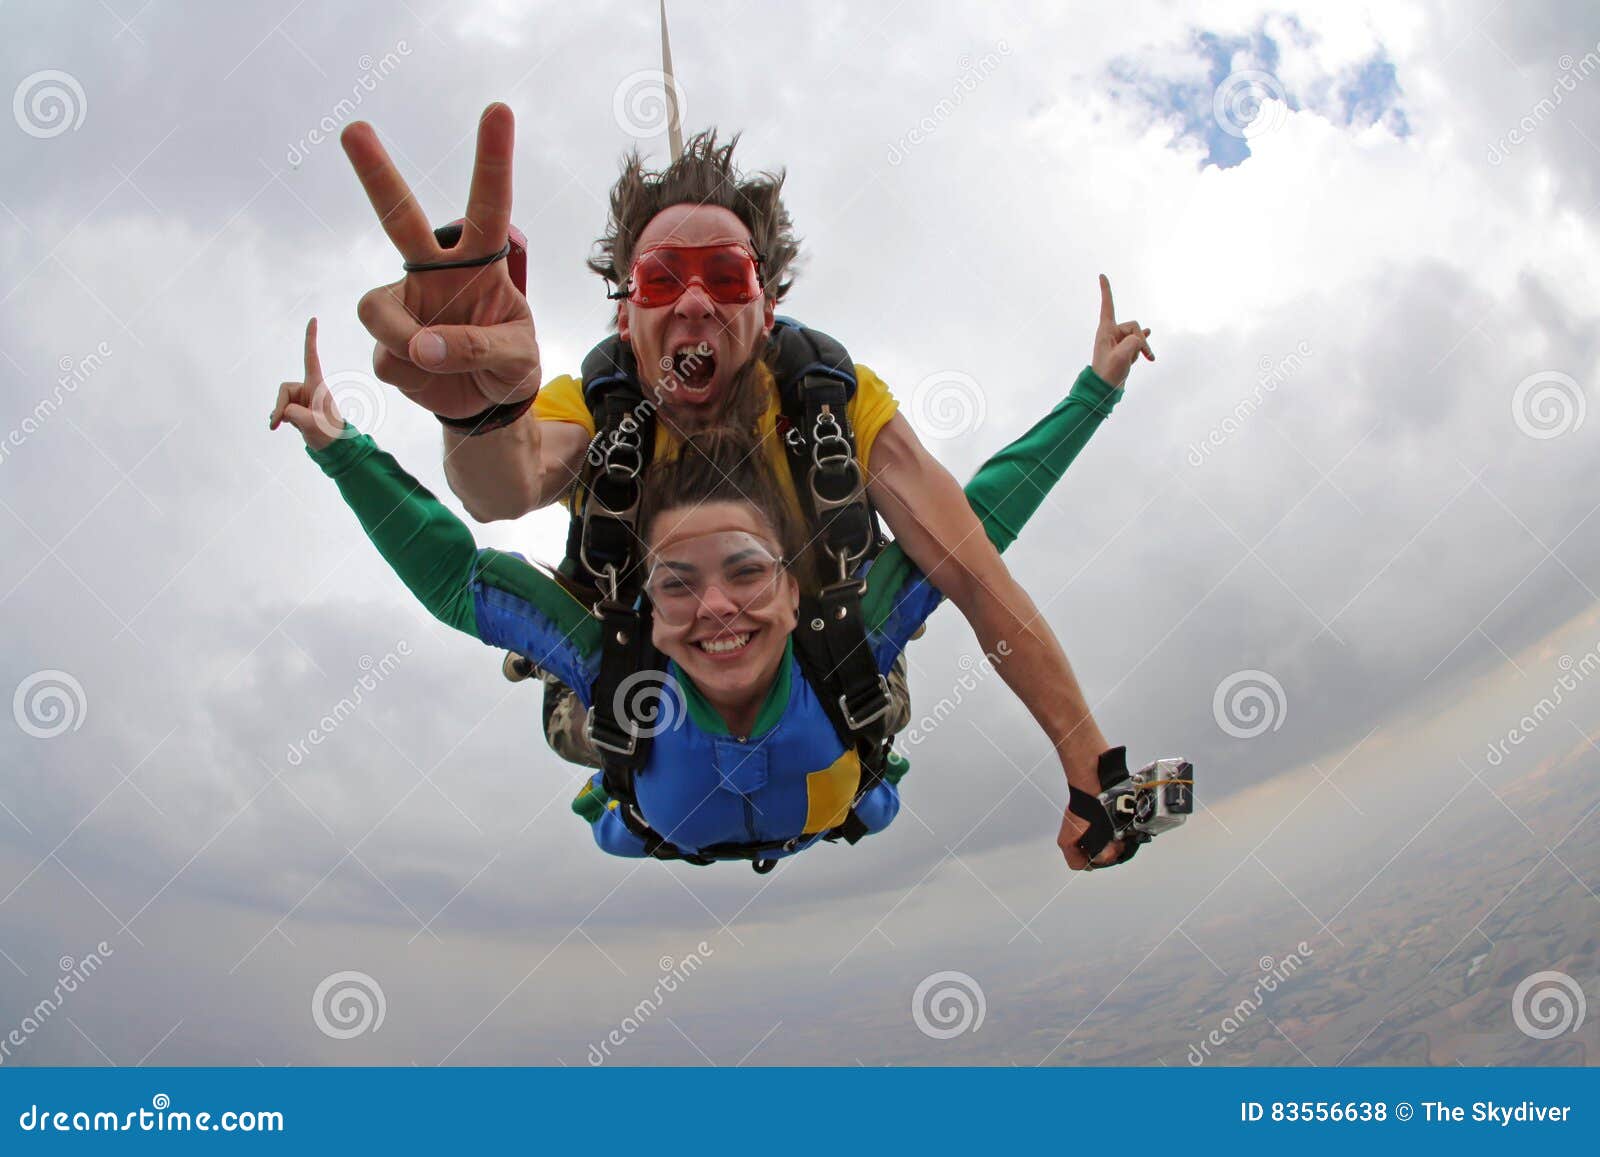 skydiving tandem happiness